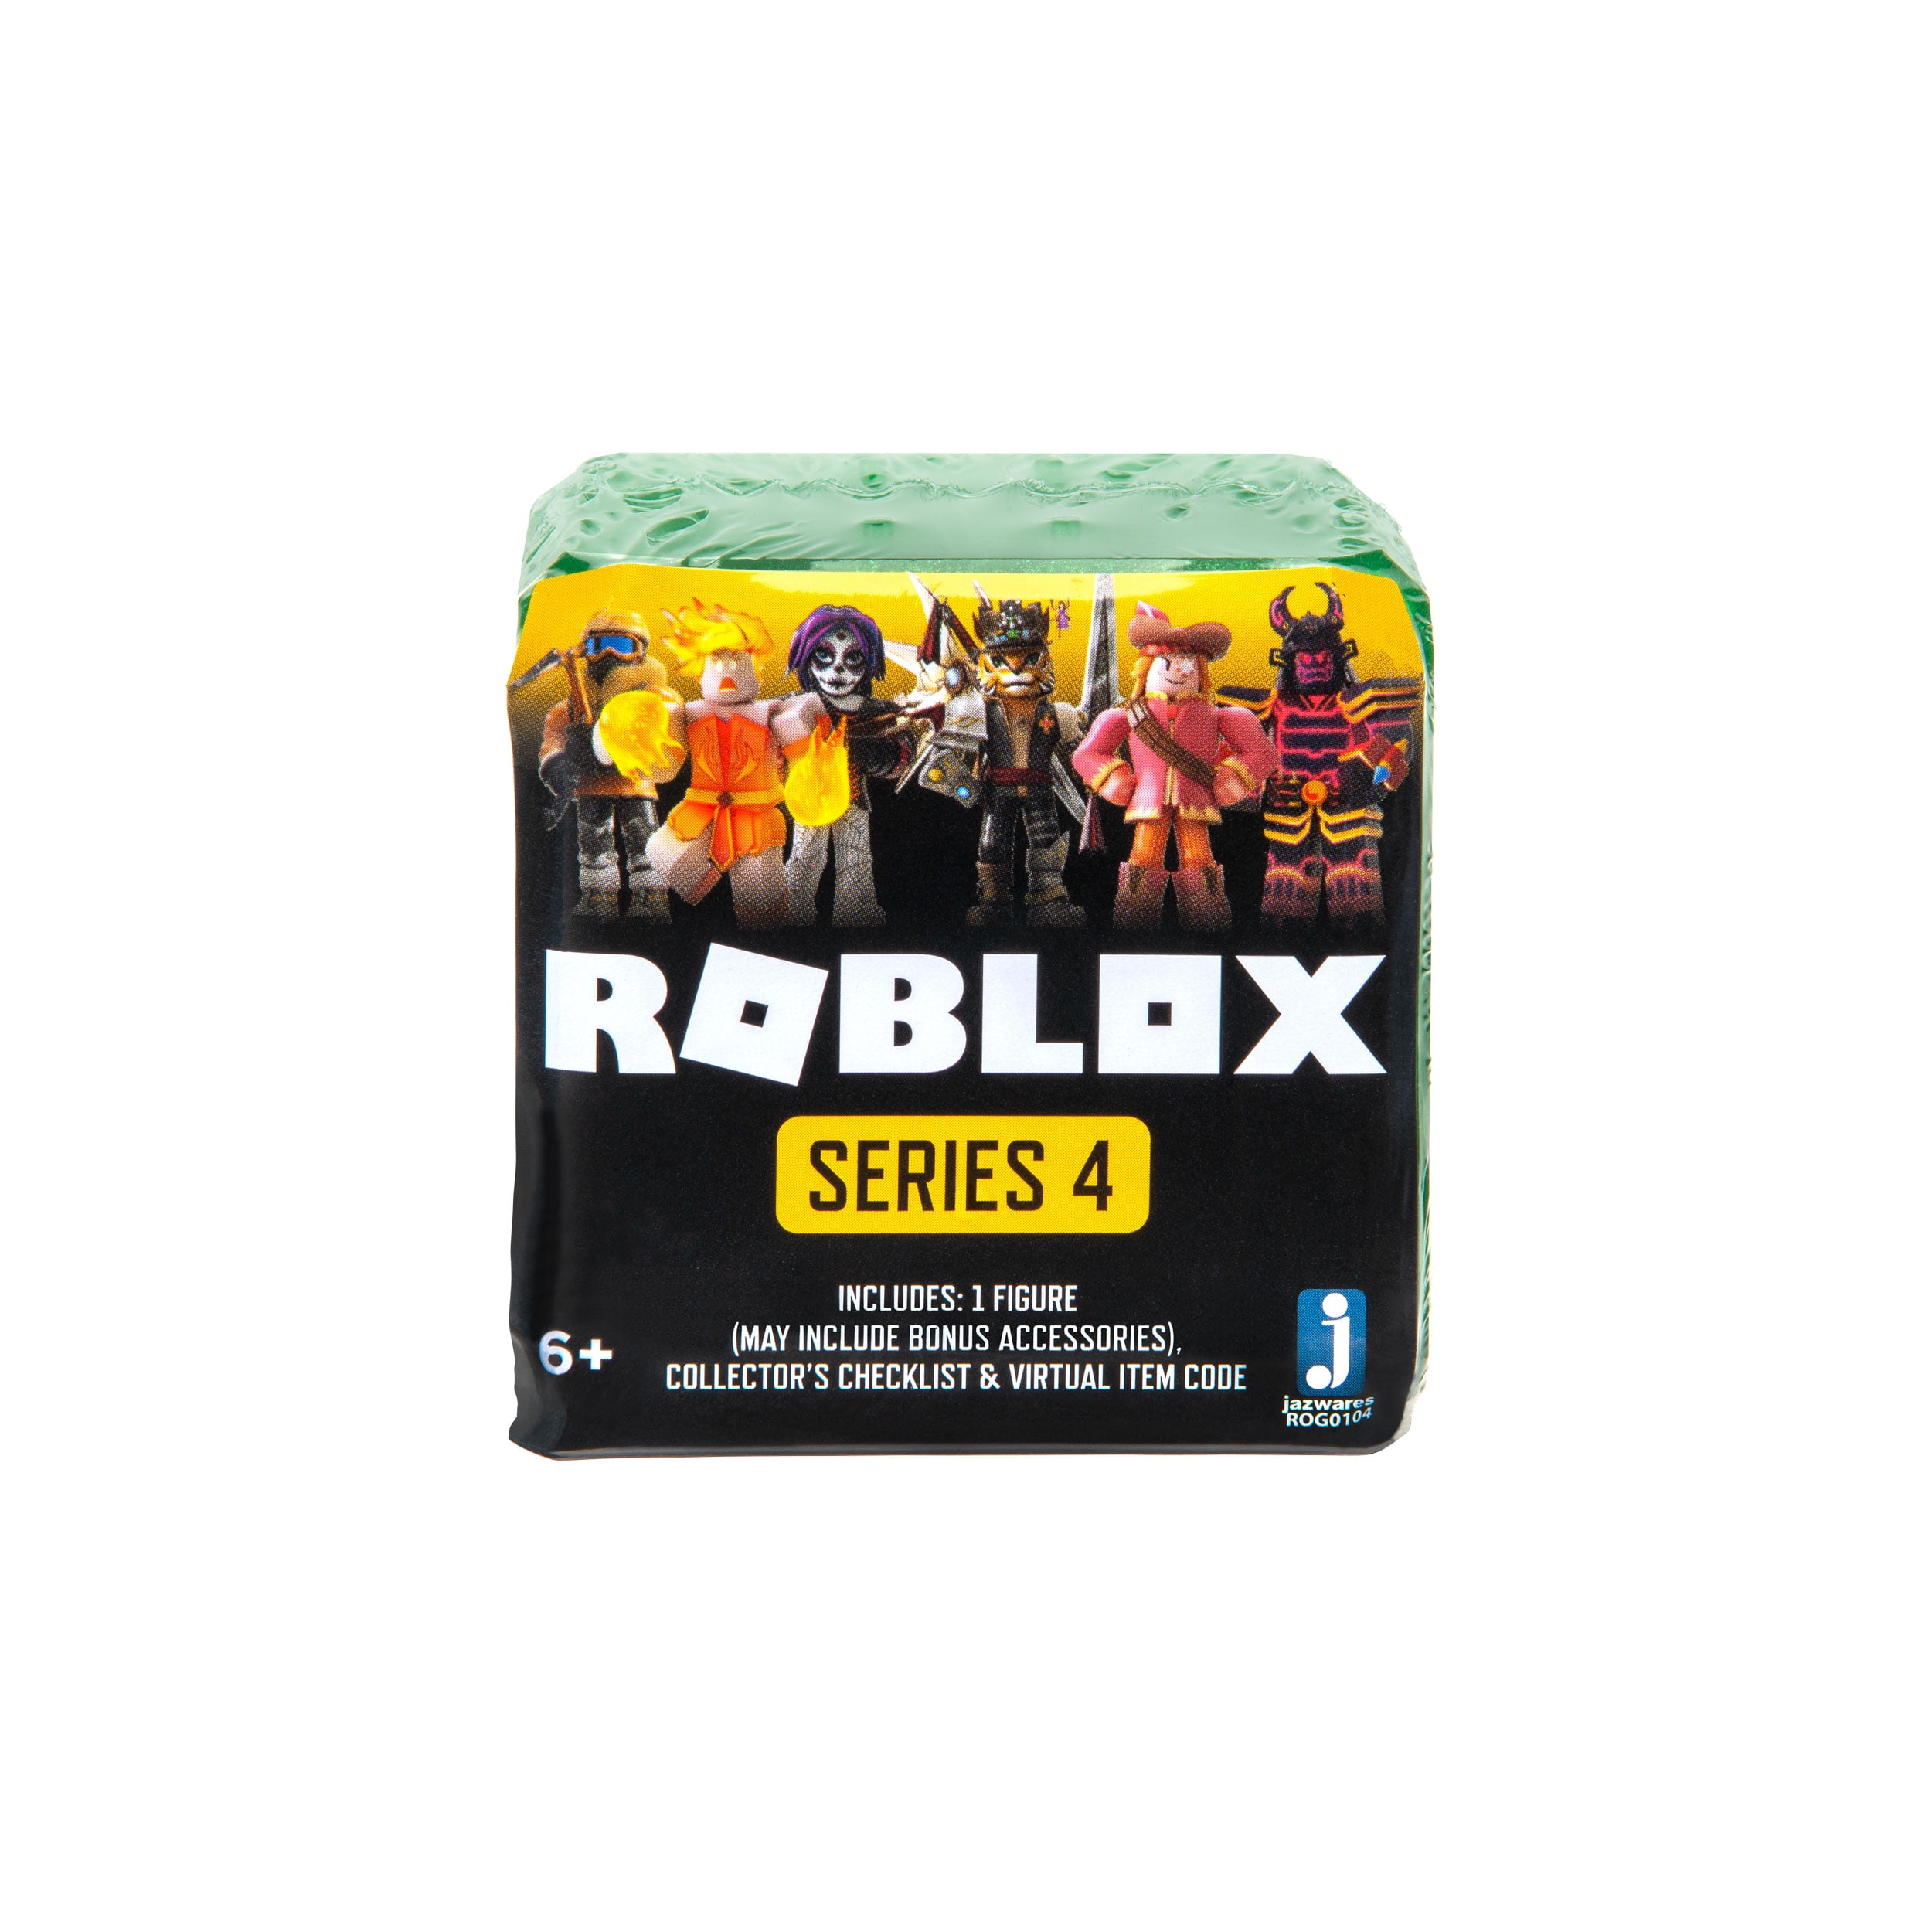 Roblox Celebrity Collection Series 4 Mystery Figure Includes 1 Figure Exclusive Virtual Item Walmart Com Walmart Com - roblox celebrity collection fashion famous playset includes exclusive virtual item walmart com walmart com